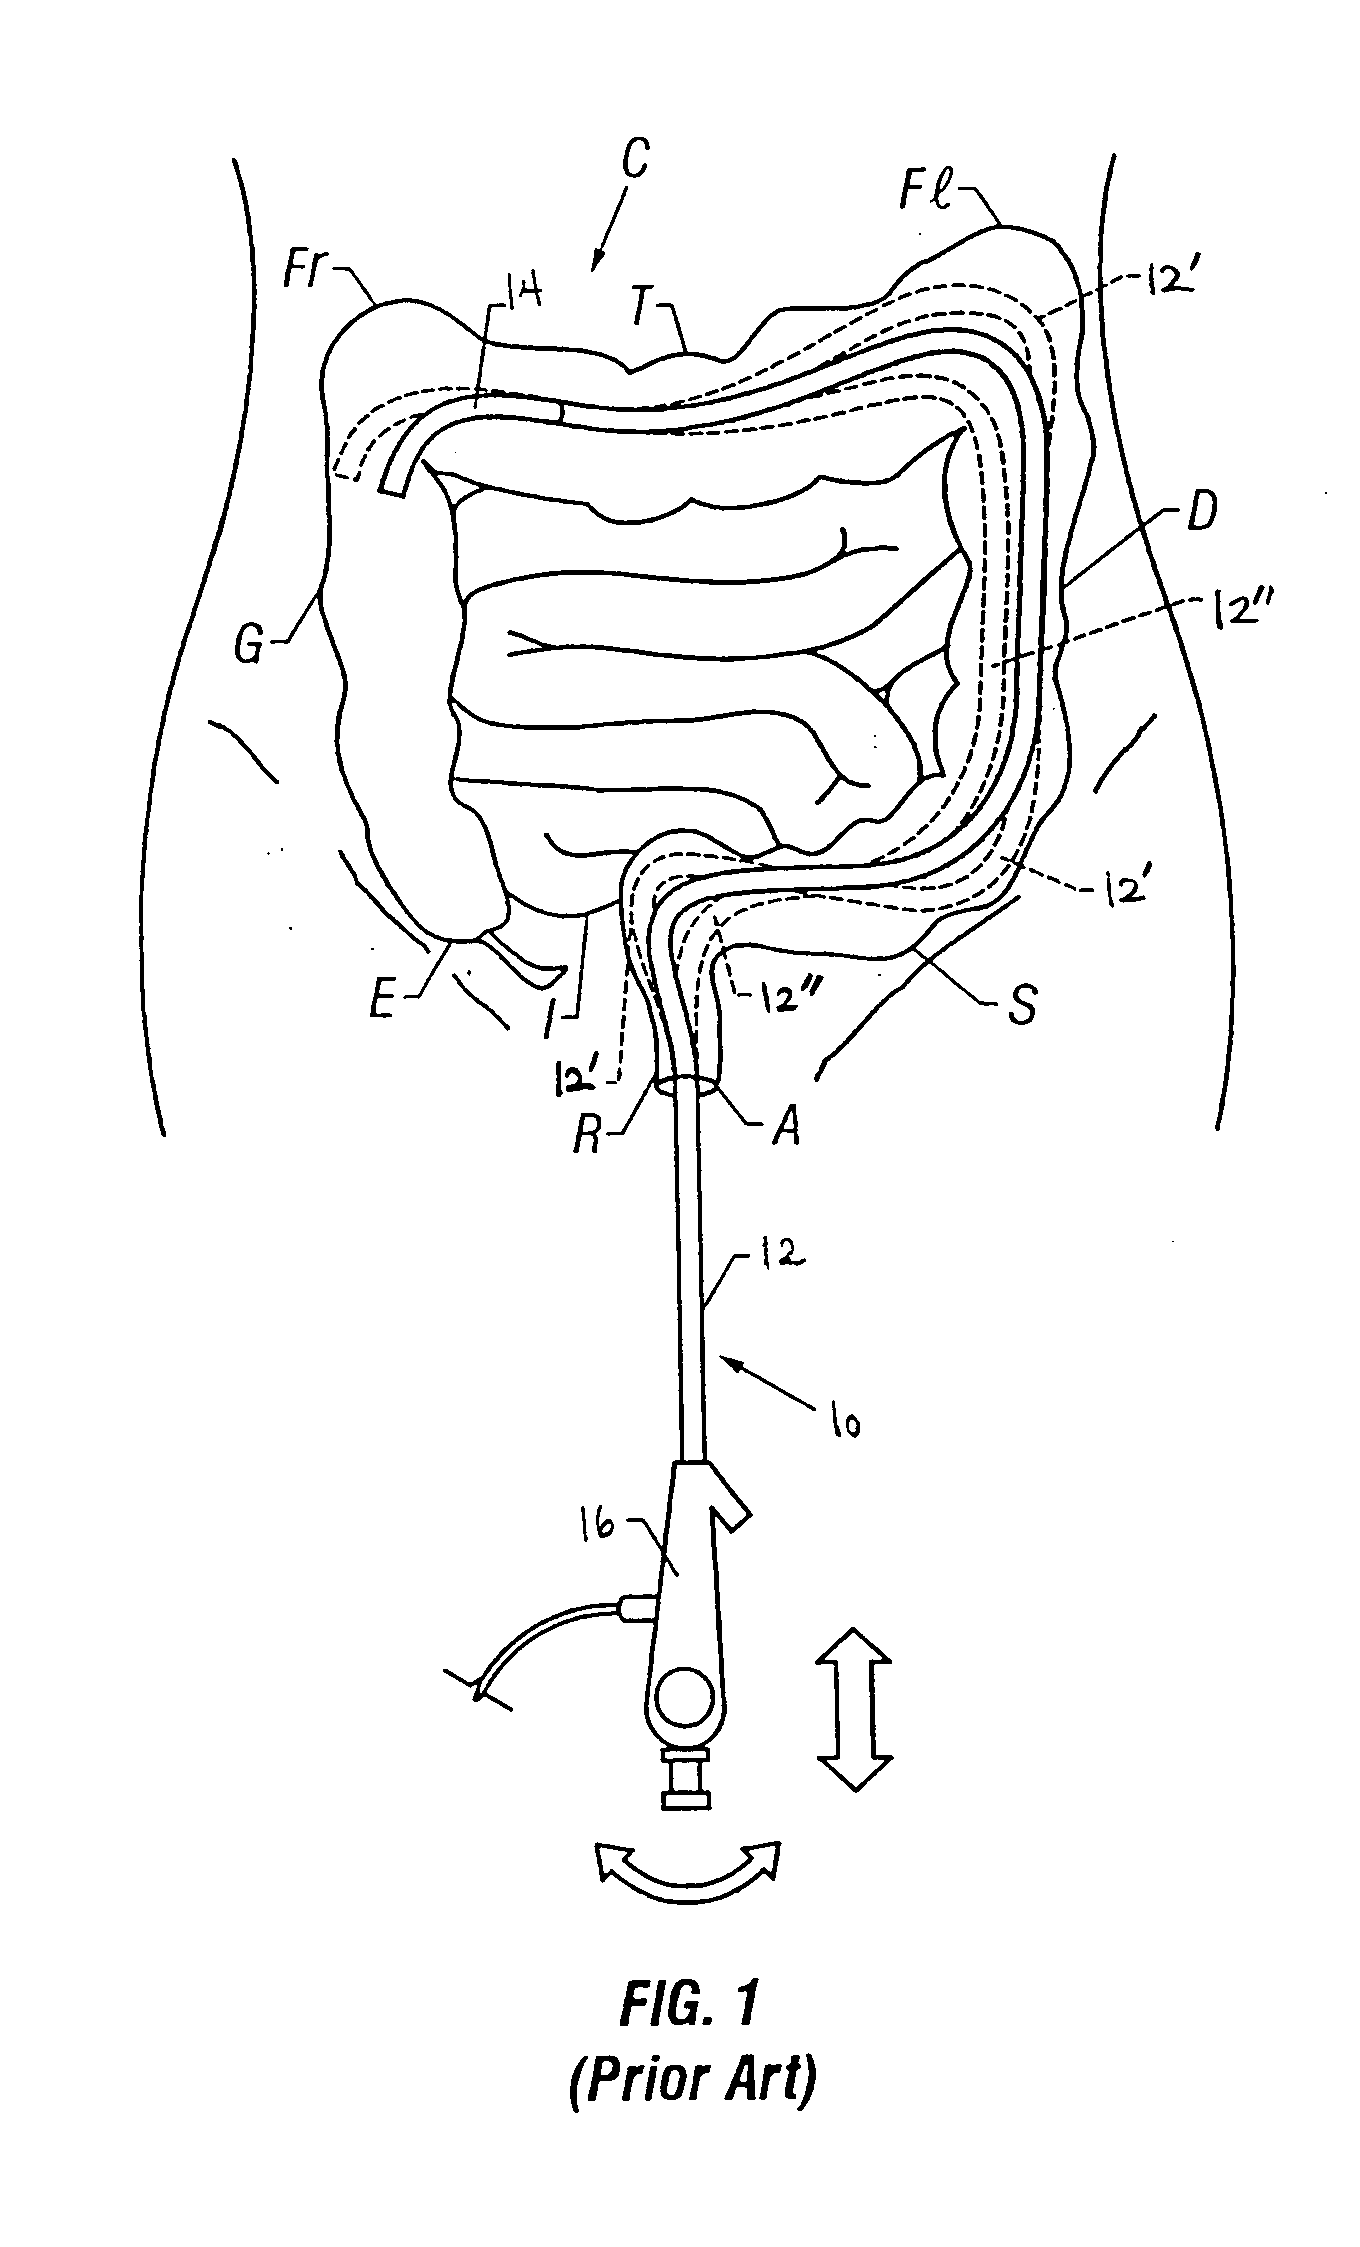 Method and apparatus for advancing an instrument along an arbitrary path using an introducer sheath